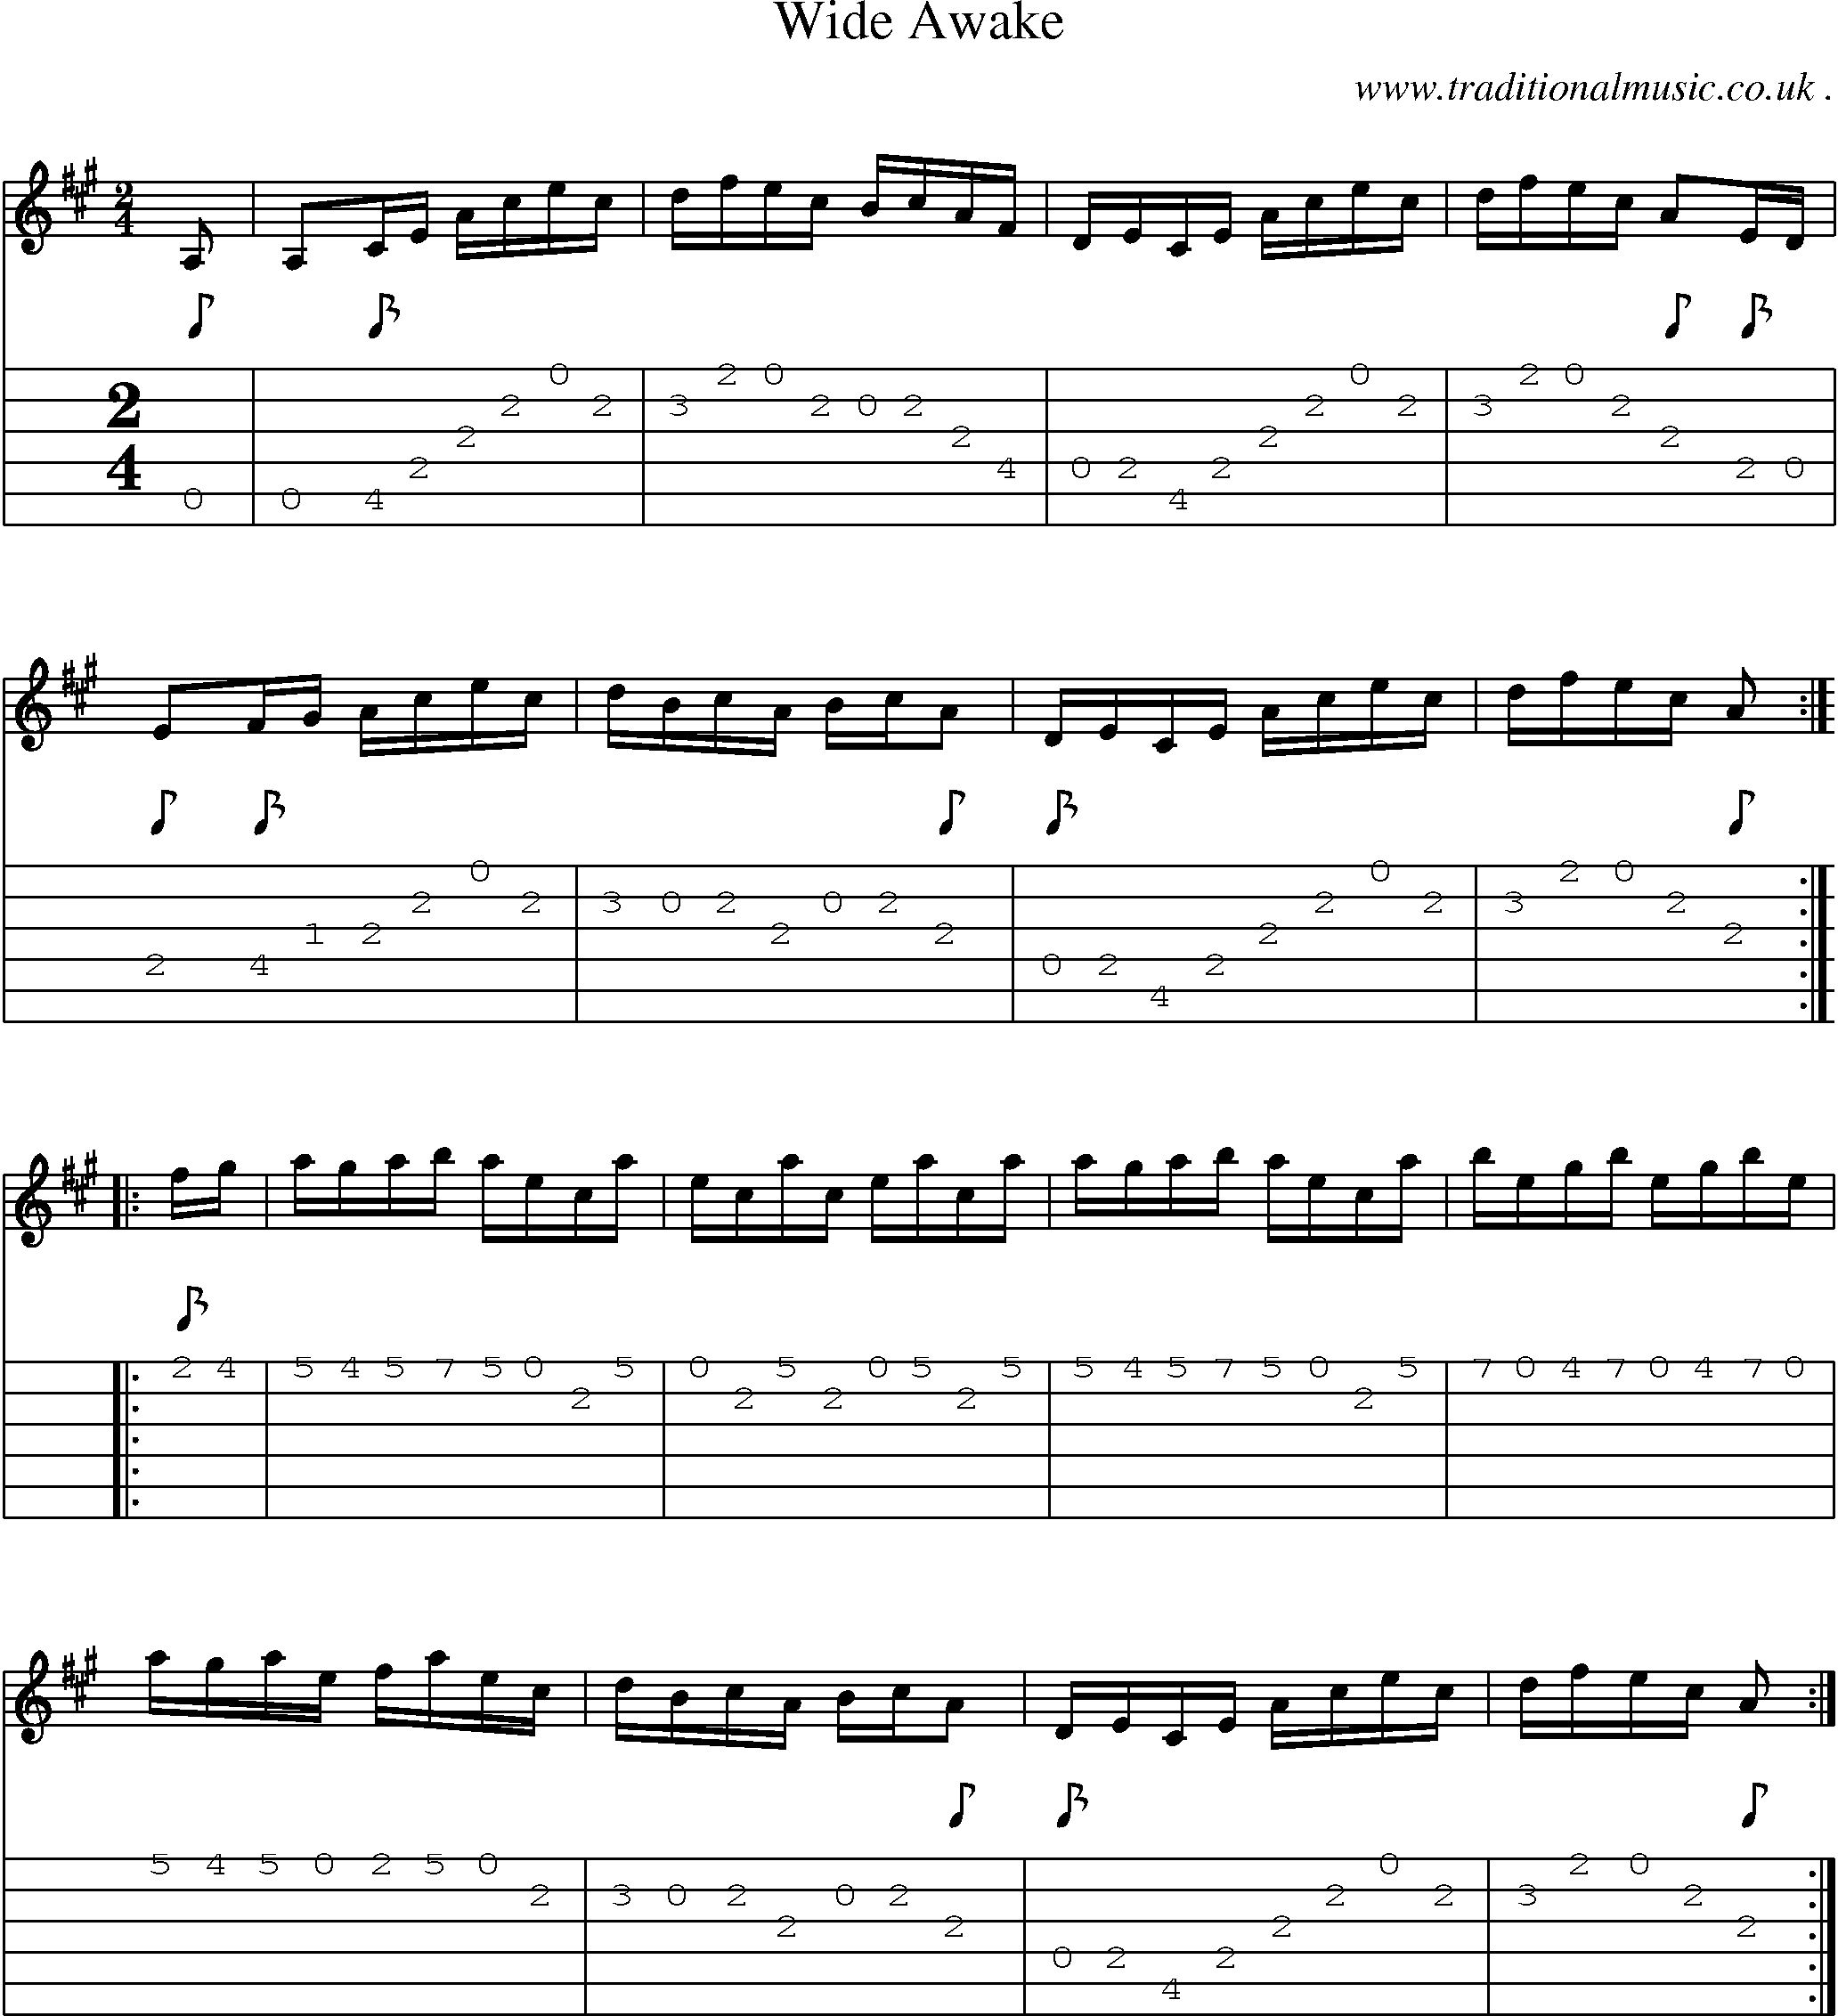 Sheet-Music and Guitar Tabs for Wide Awake